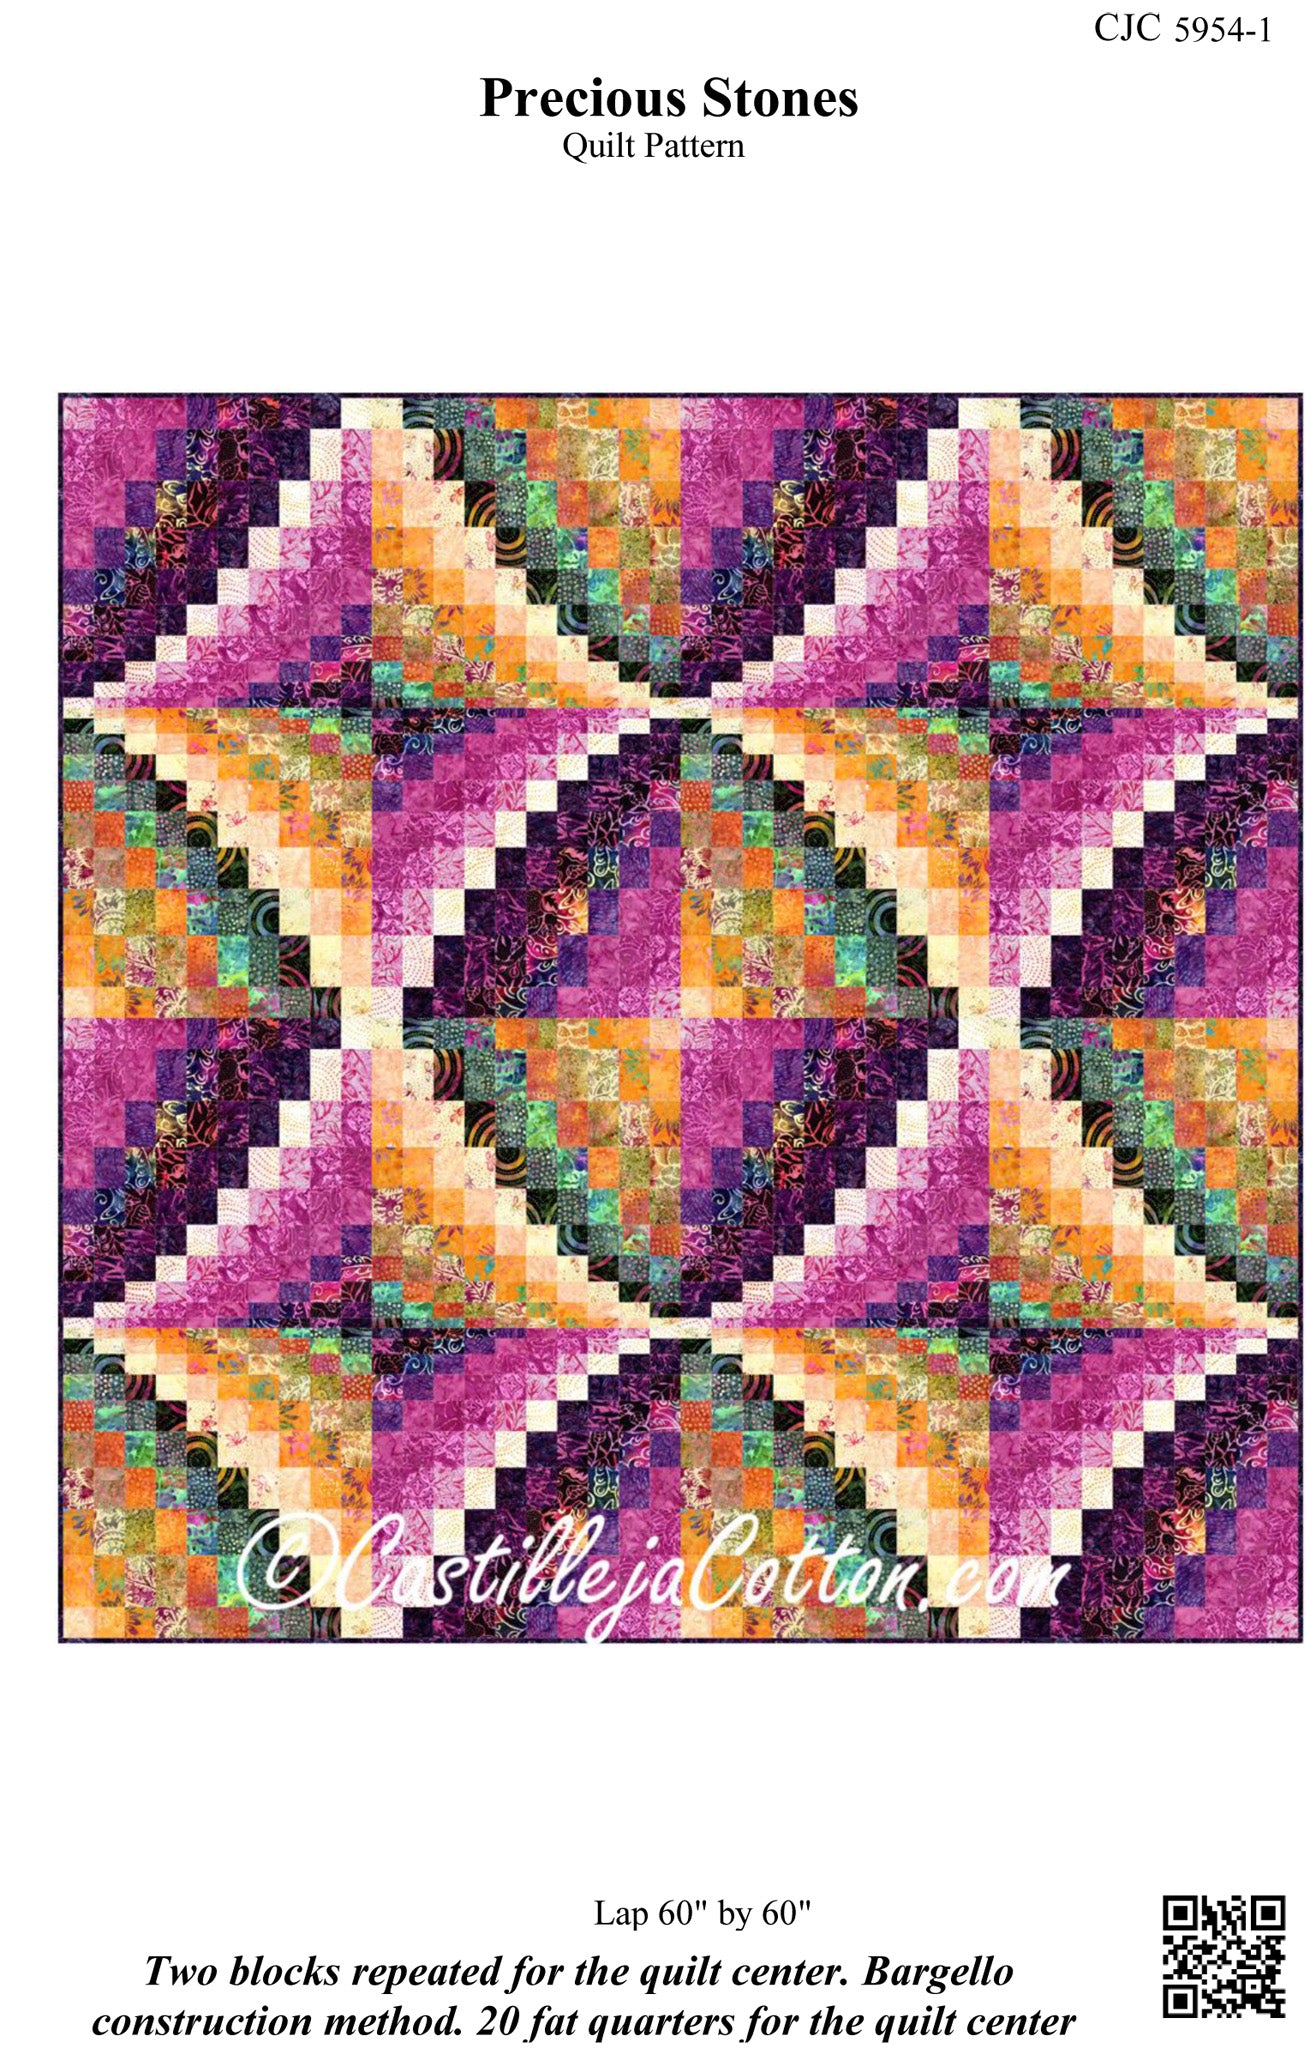 Cover image of pattern for Precious Stones quilt.